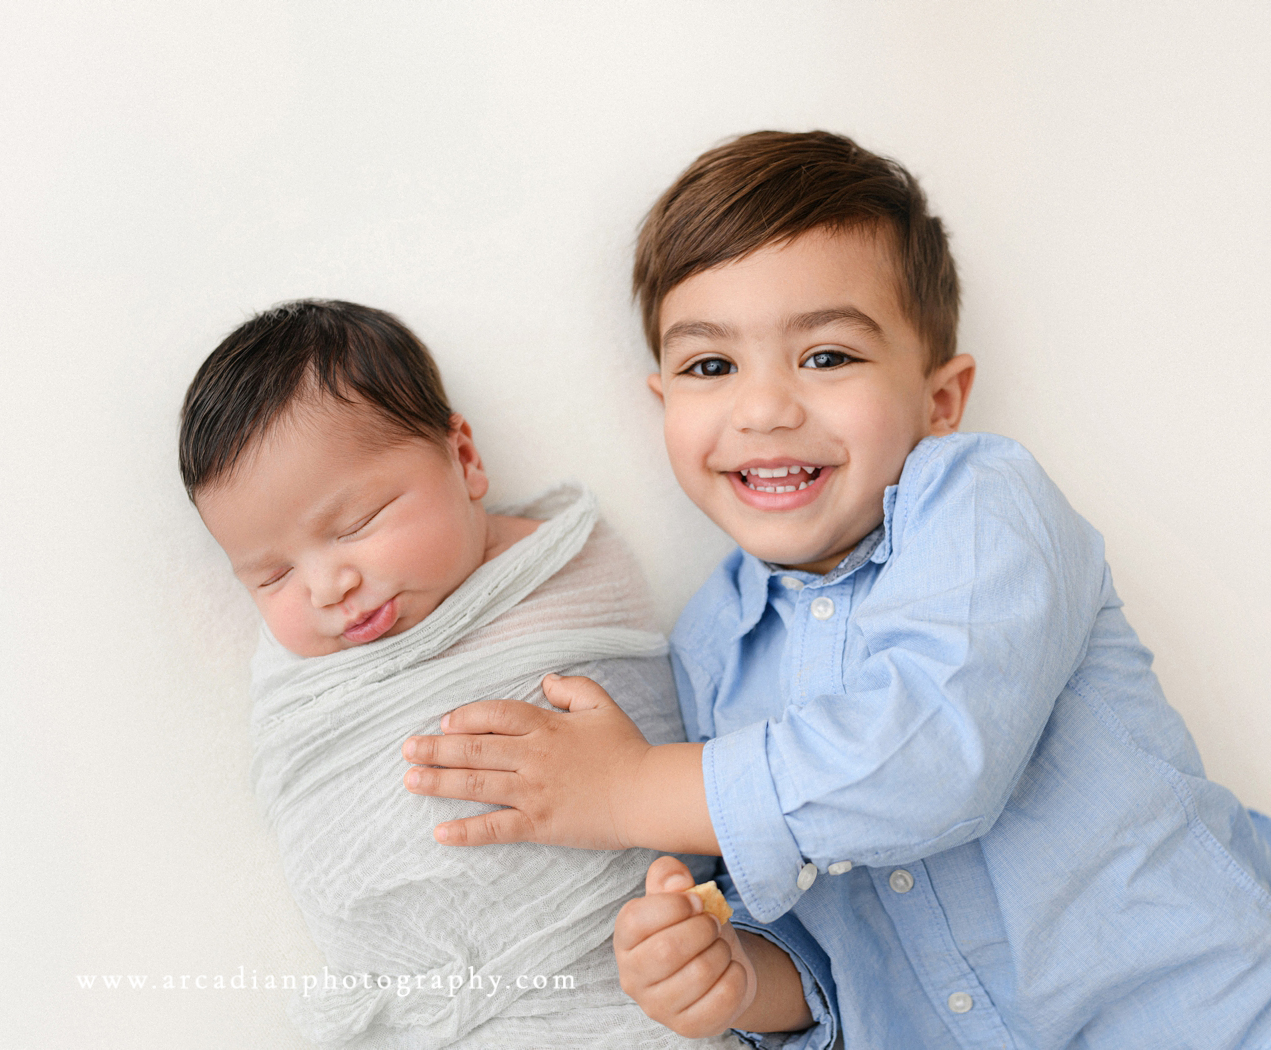 Including siblings in a newborn session